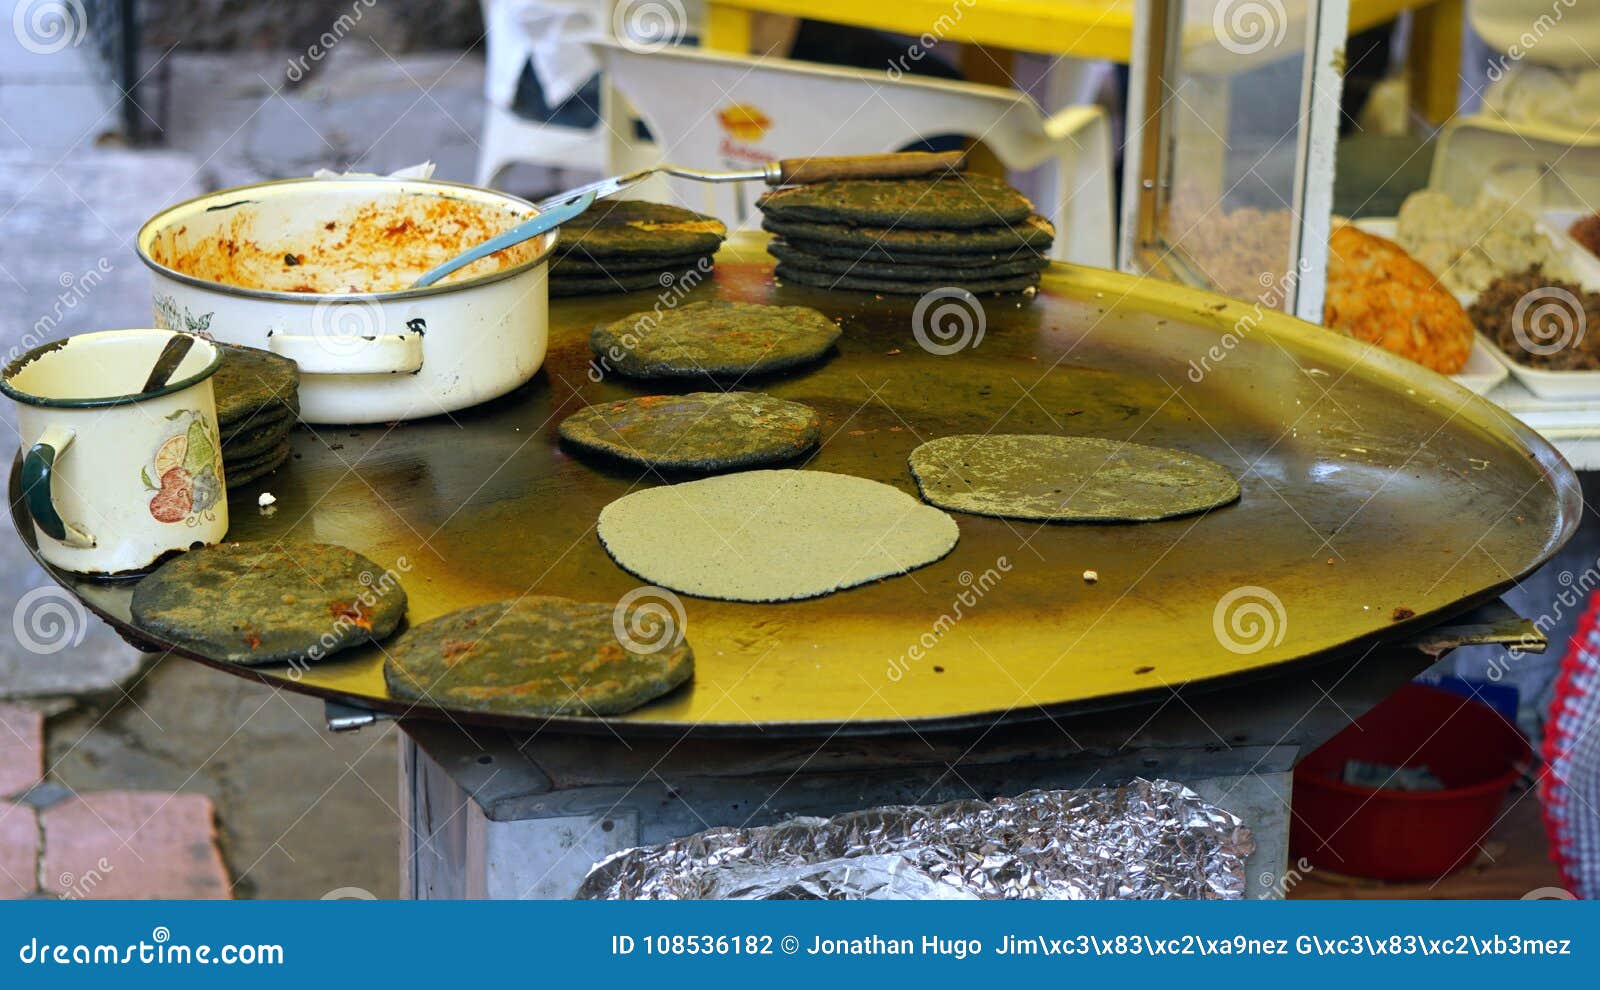 Big mexican comal and food stock photo. Image of used - 108536182